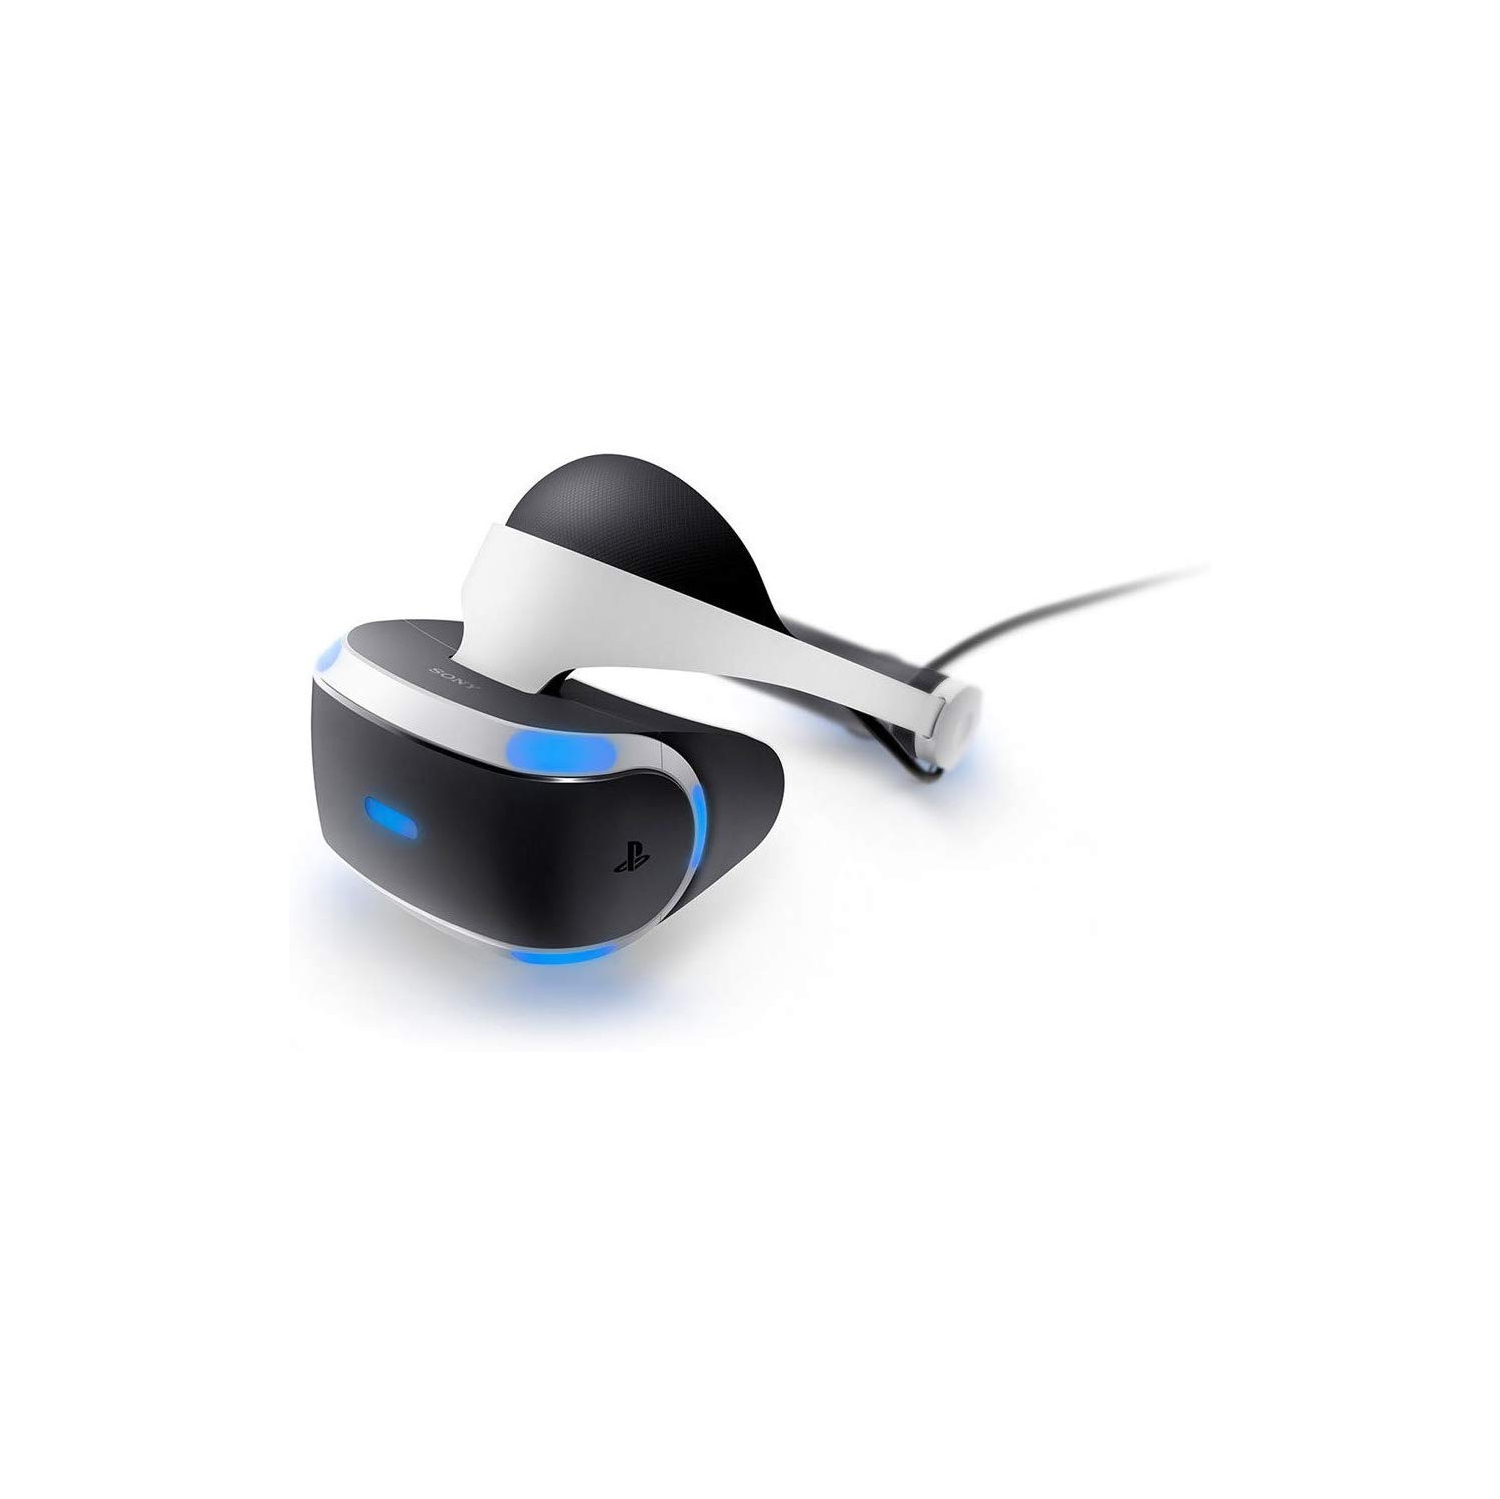 Refurbished (Excellent) Sony PlayStation VR Headset for Playstation 4